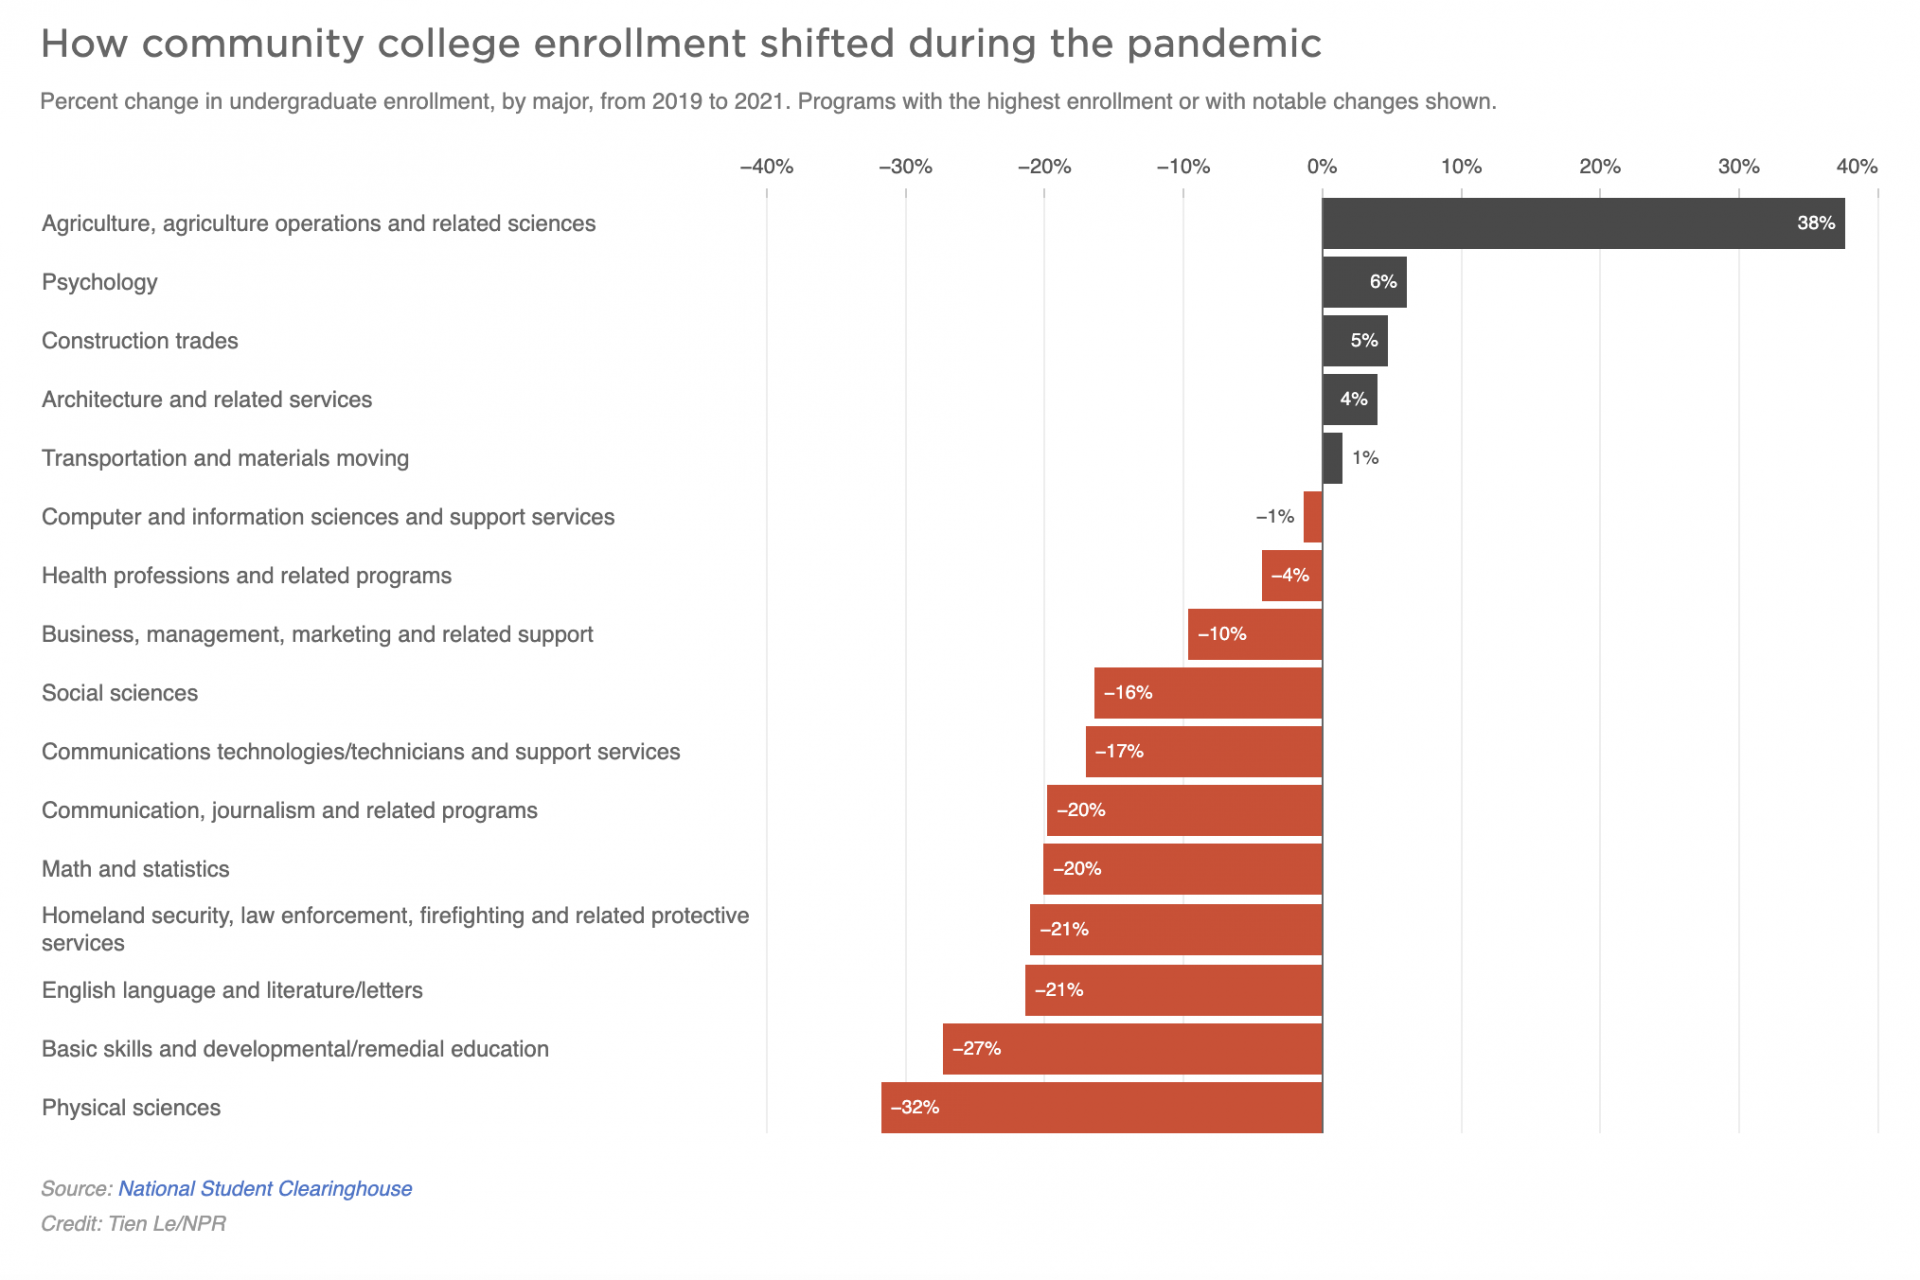 Community college enrollment data indicating changes by area of study